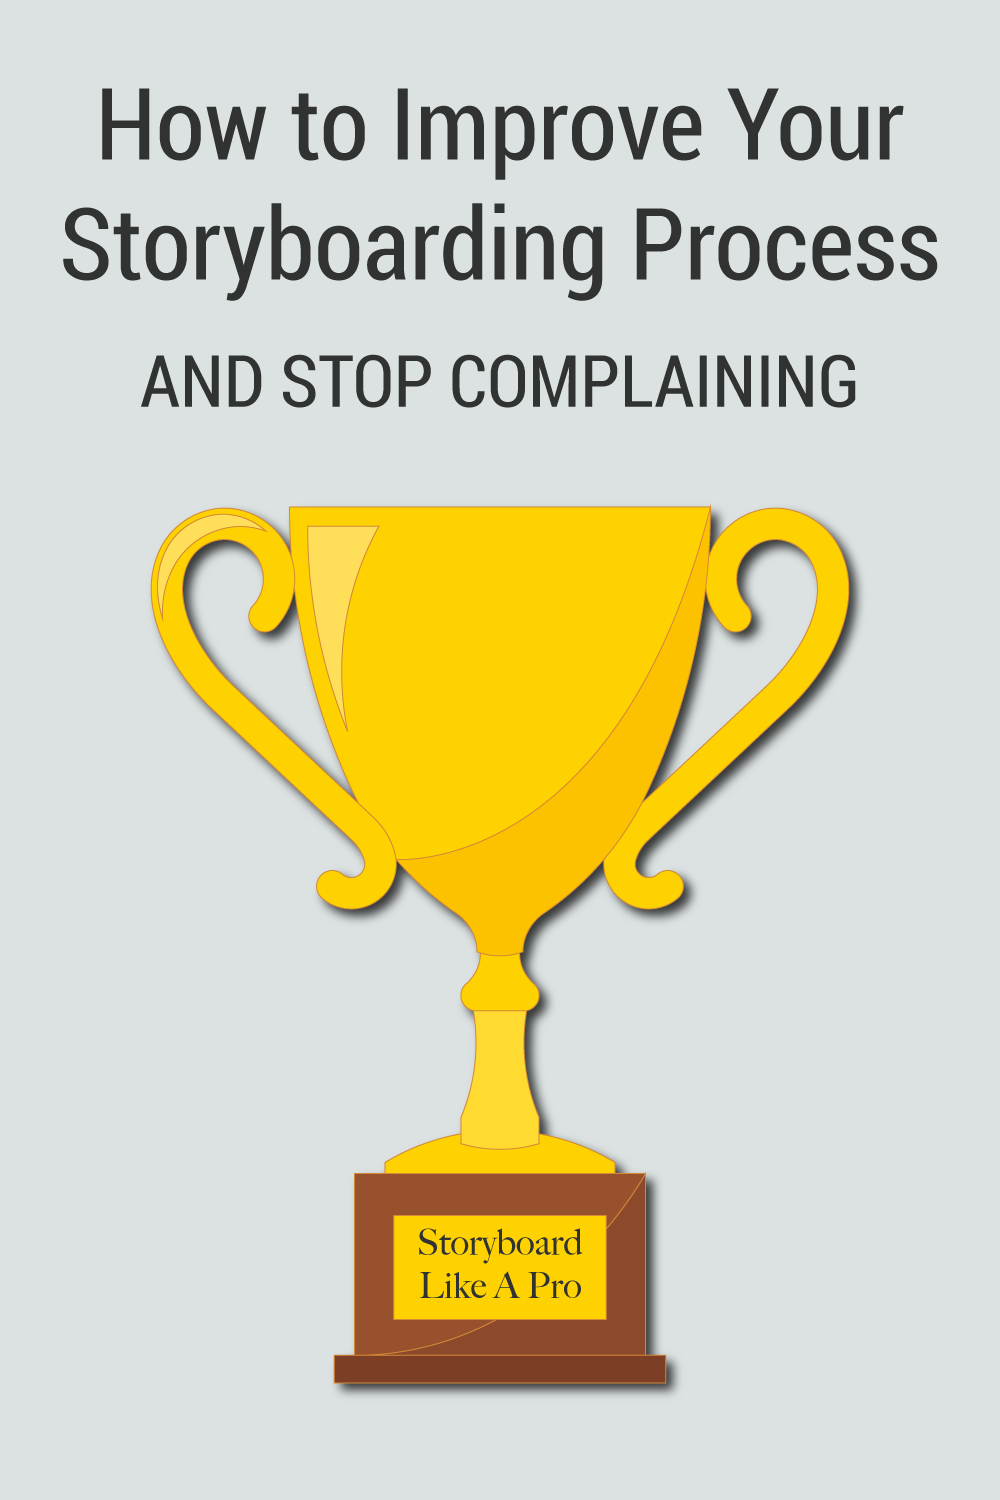 How to Improve Your Storyboarding Process (and stop complaining)